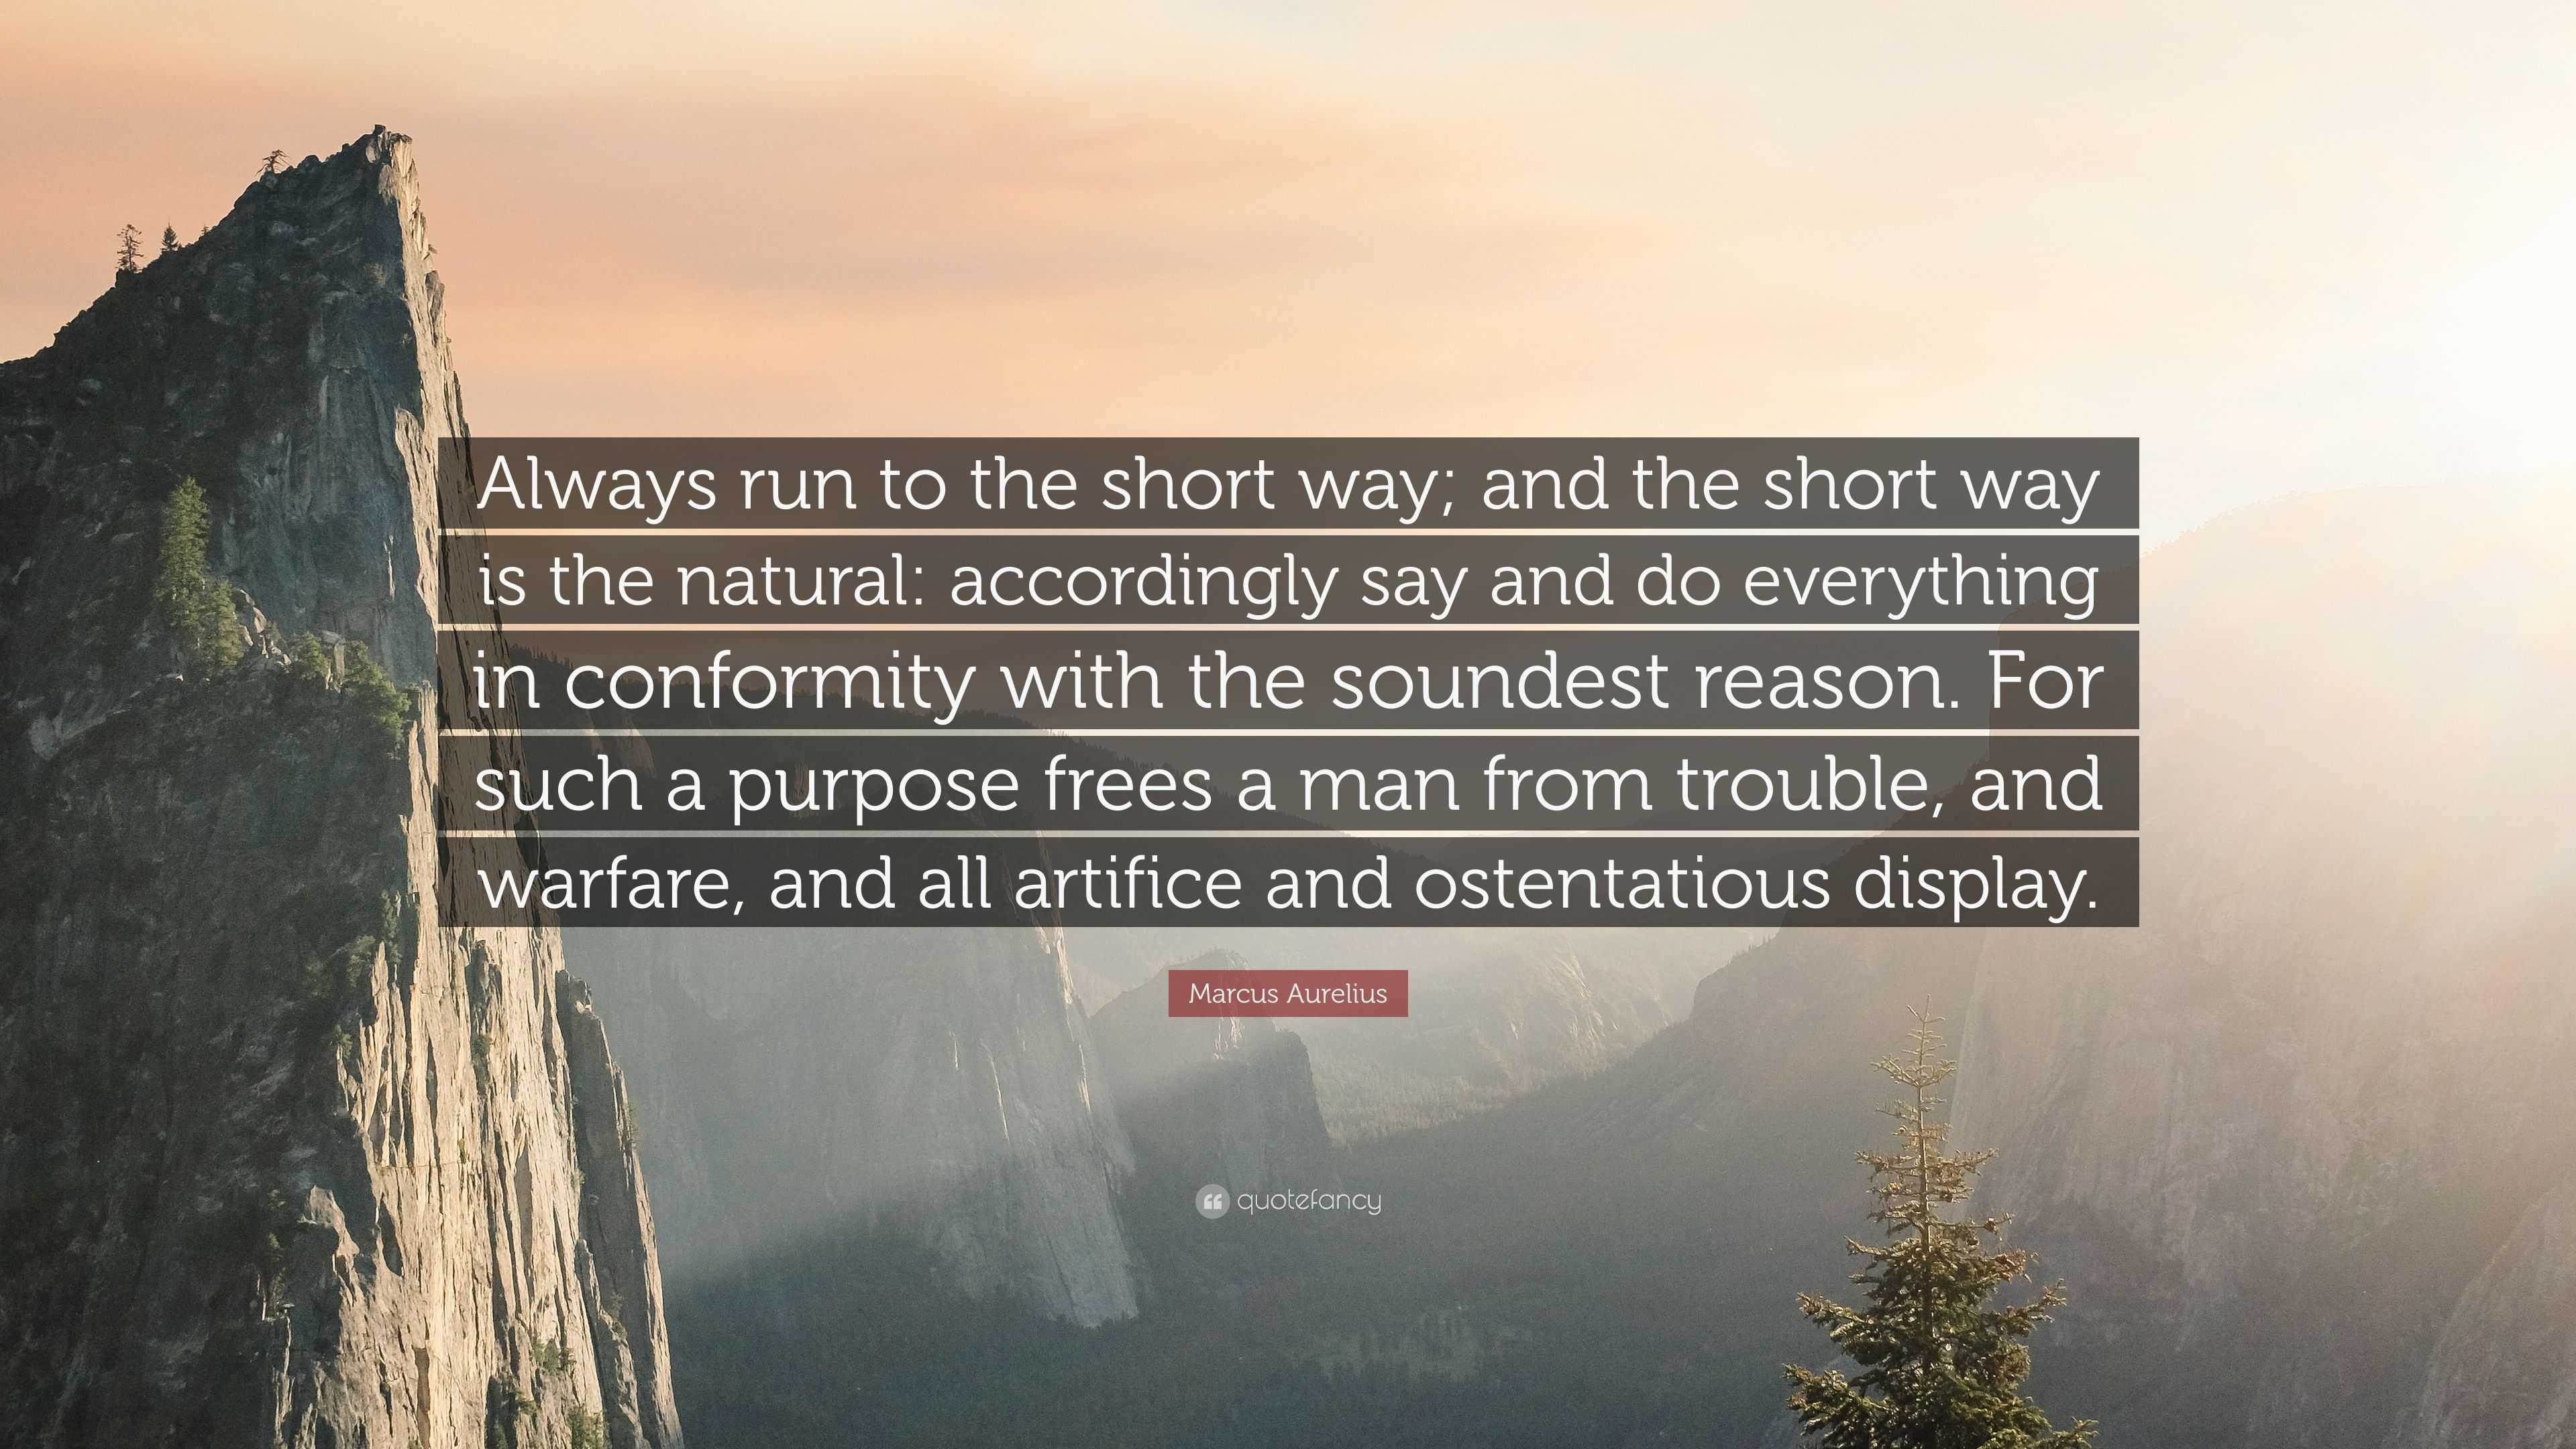 Marcus Aurelius Quote: “Always run to the short way; and the short